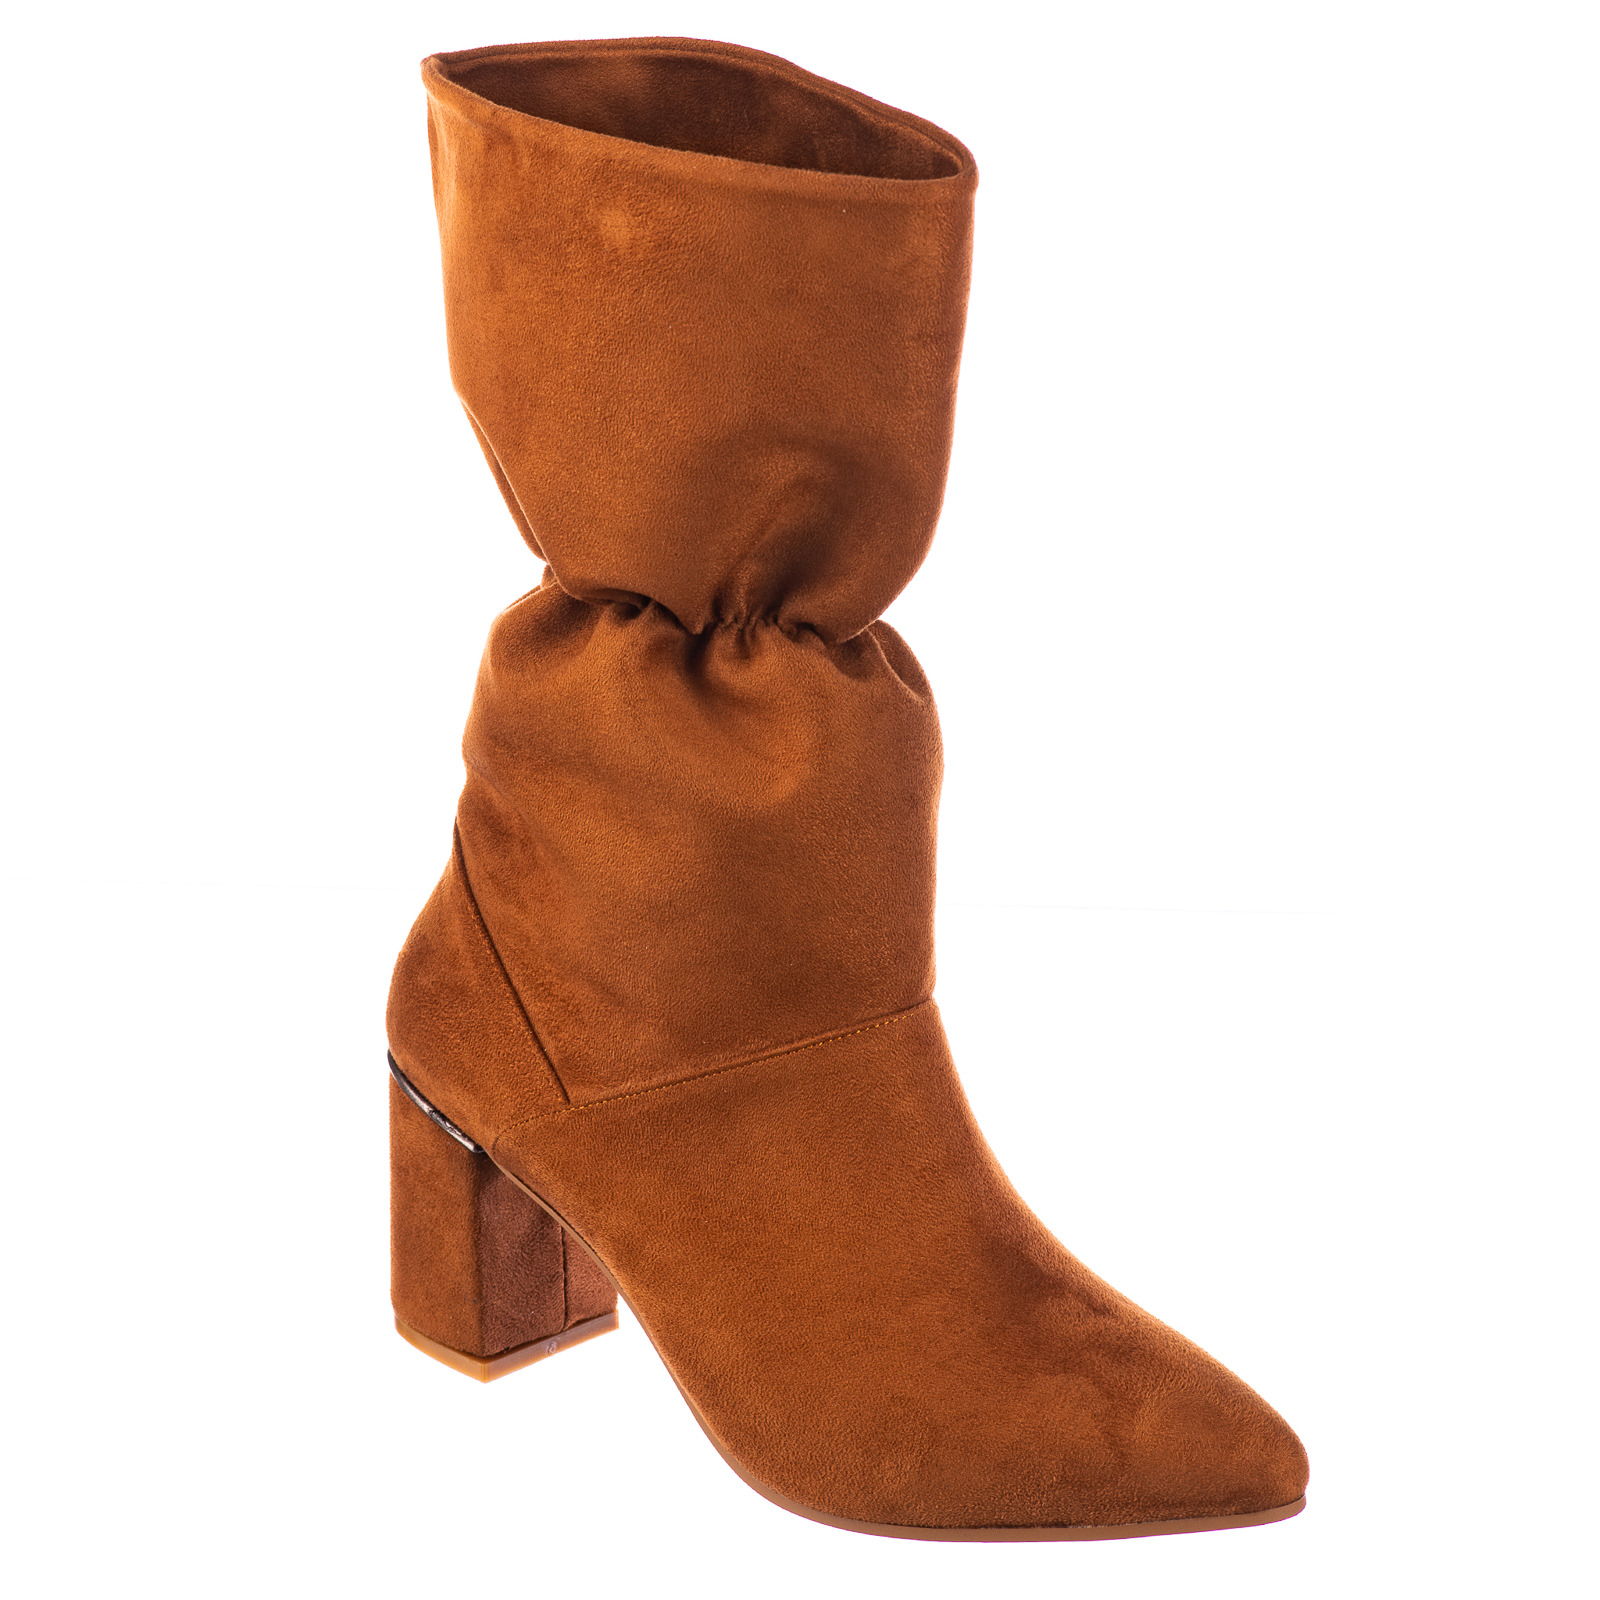 Women ankle boots B614 - CAMEL